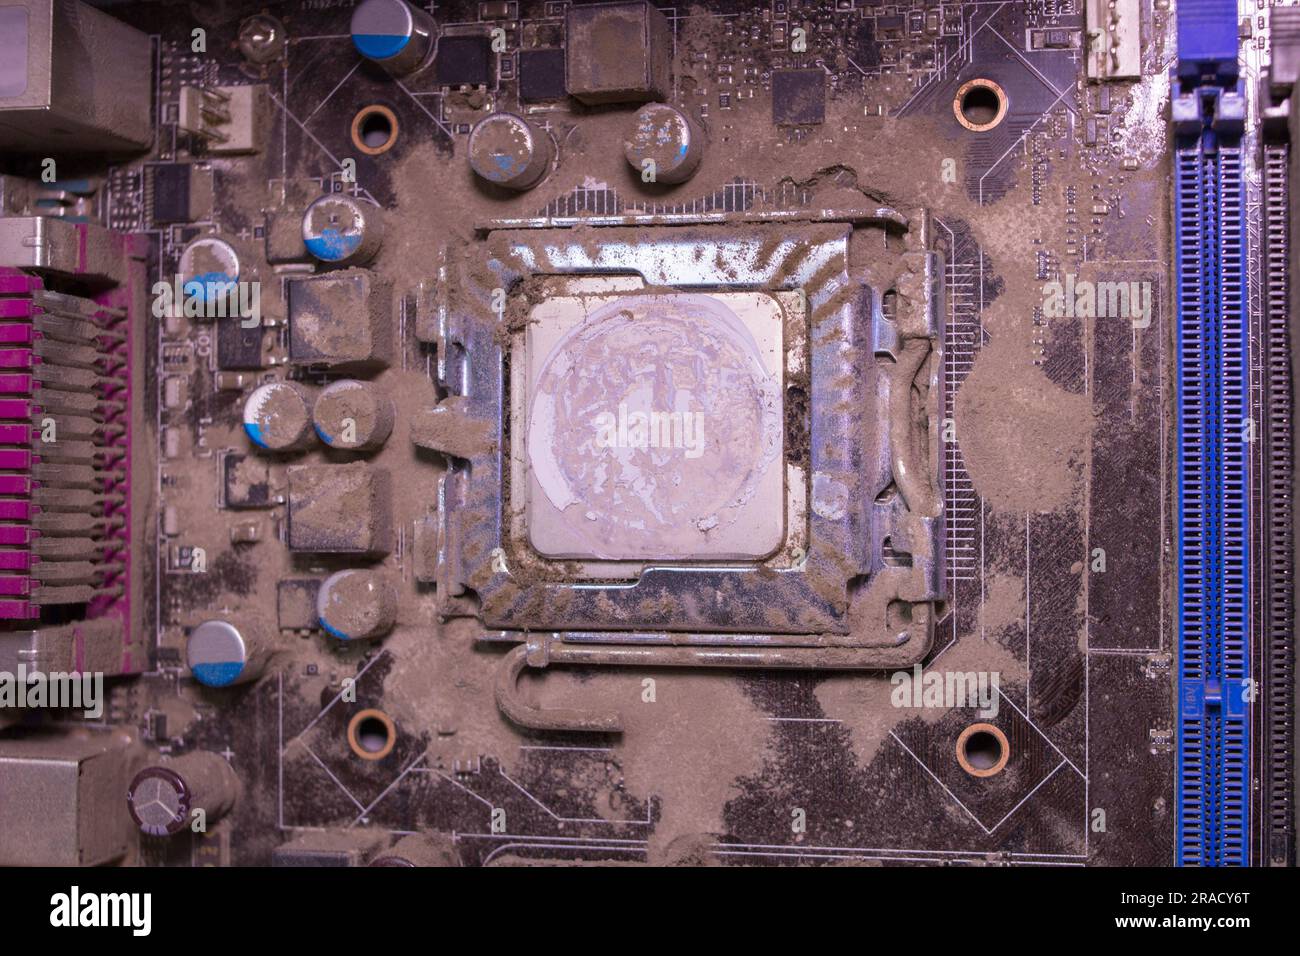 broken old computer with dust covered Stock Photo